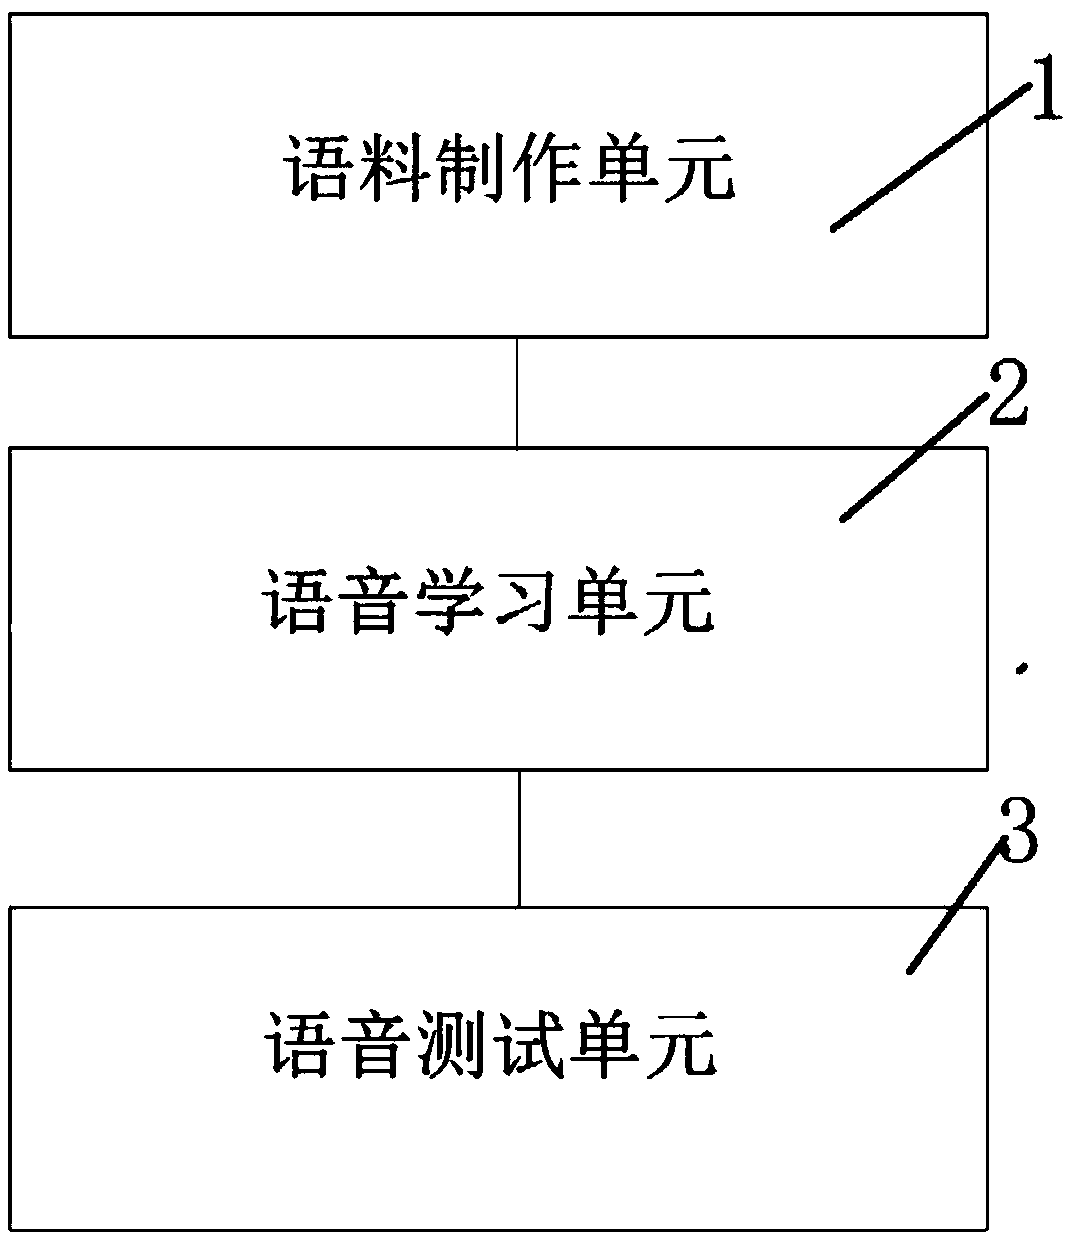 Voice learning system and method